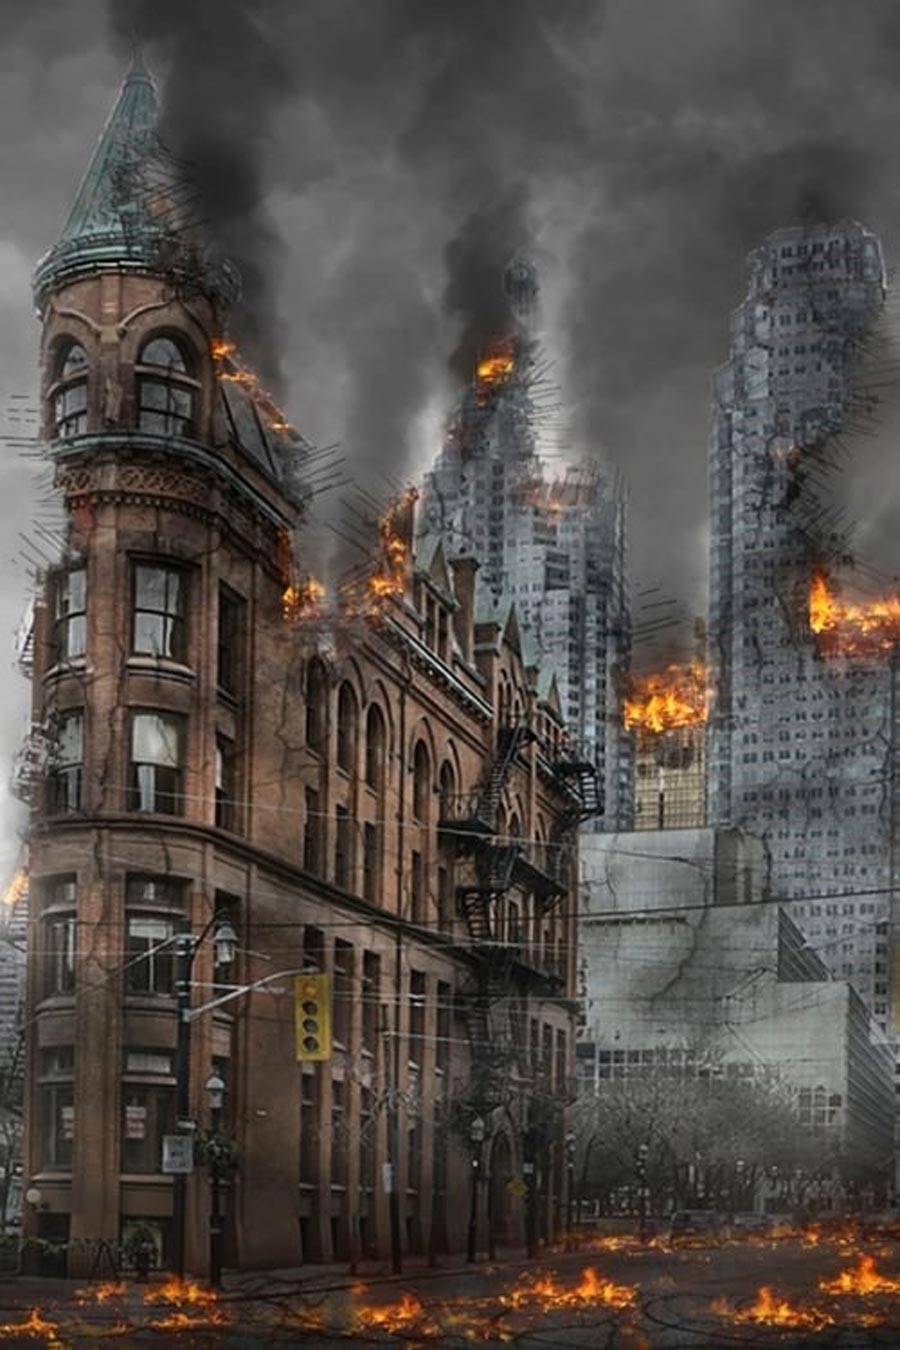 Fire In City PicsArt Background Free Stock Image